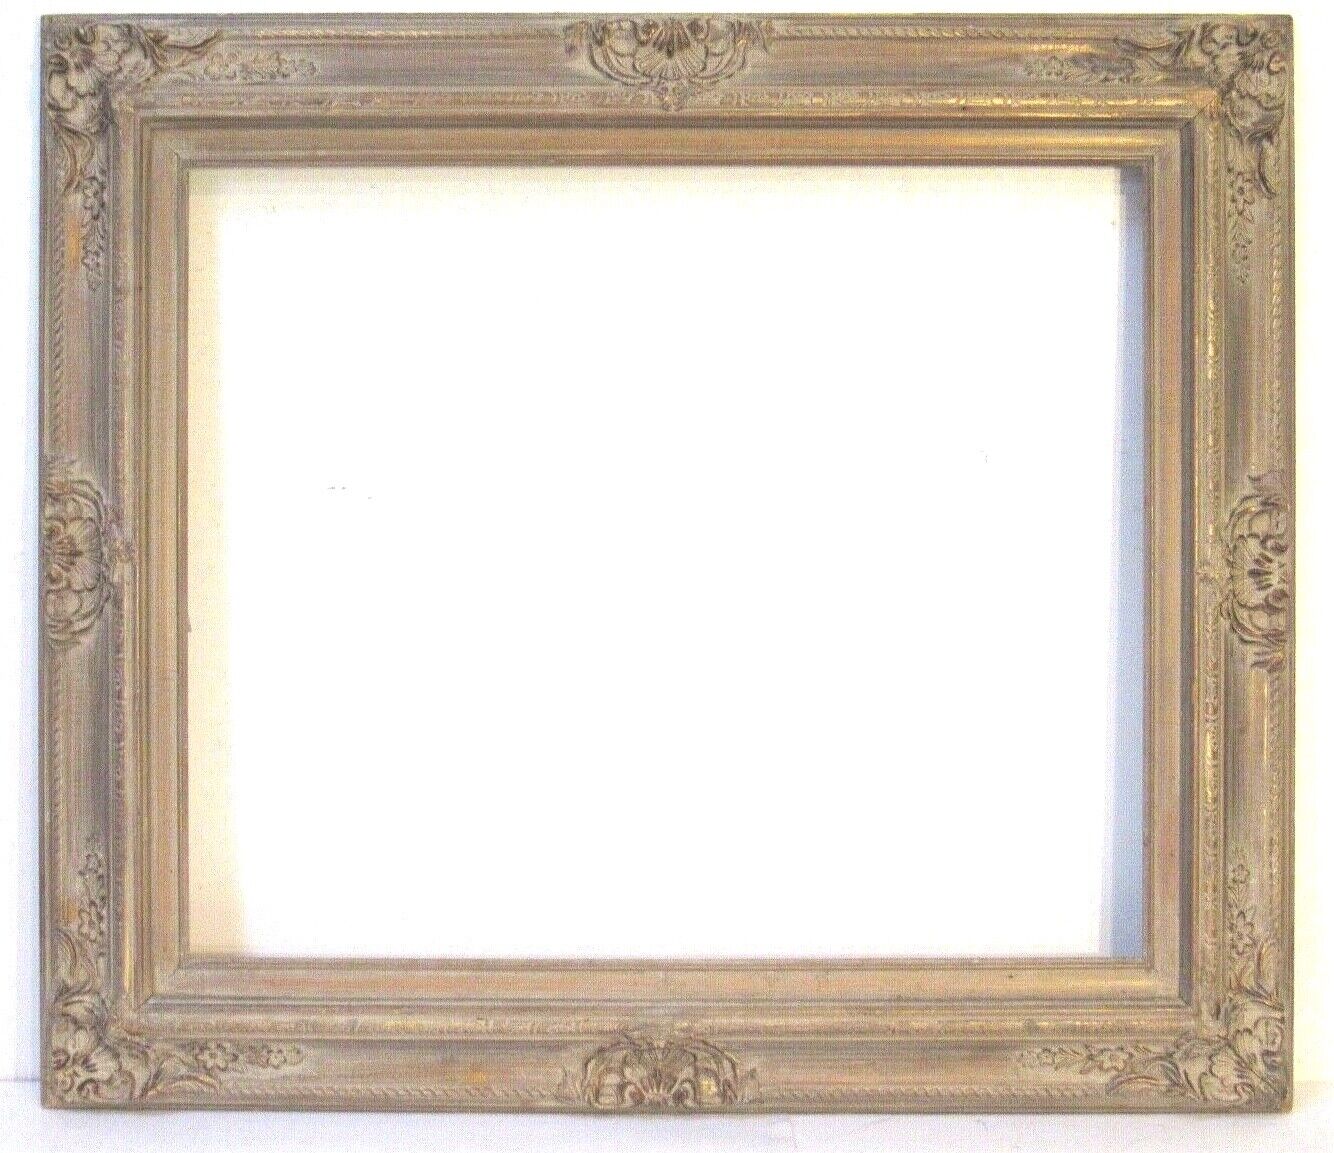  WHITEWASH / GILDED  GREAT QUALITY FRAME FOR PAINTING 24 X 20 INCH  ( j-19)